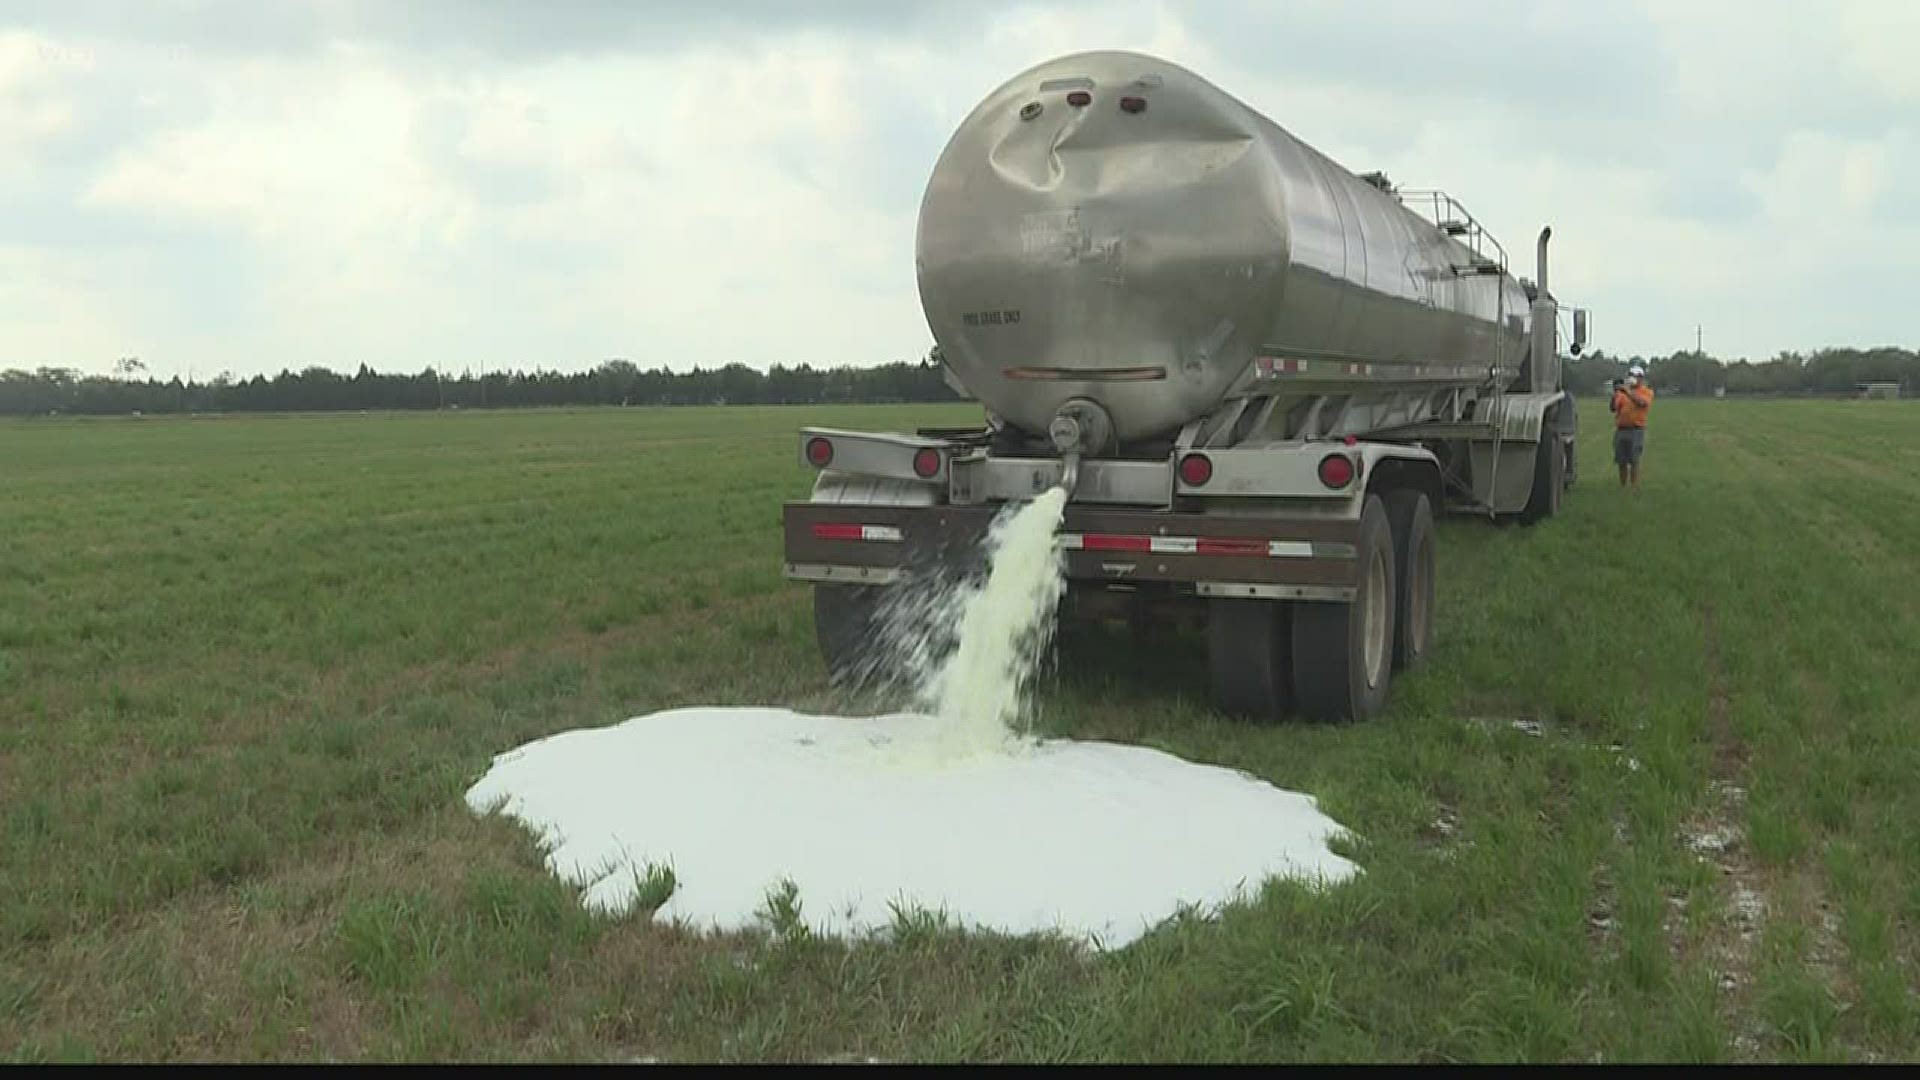 ith fewer restaurants buying milk, Jerry Dakin says he has so much extra at his farm that he has to dump it.